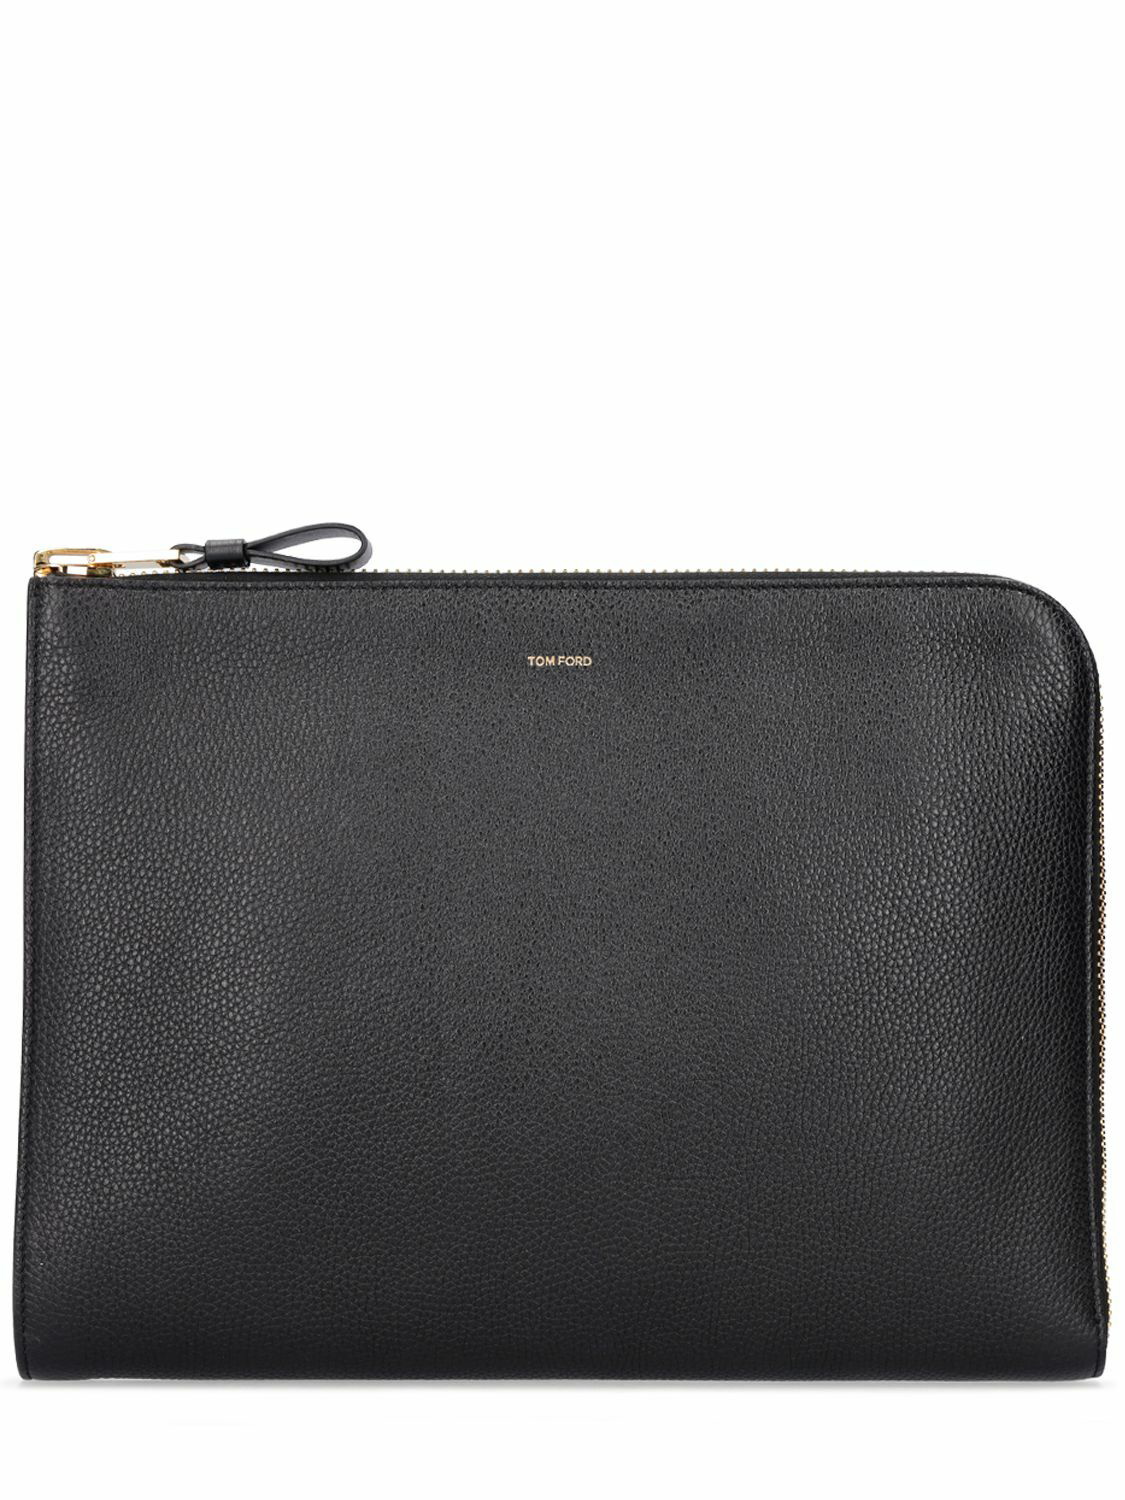 TOM FORD - Leather Logo Pouch TOM FORD